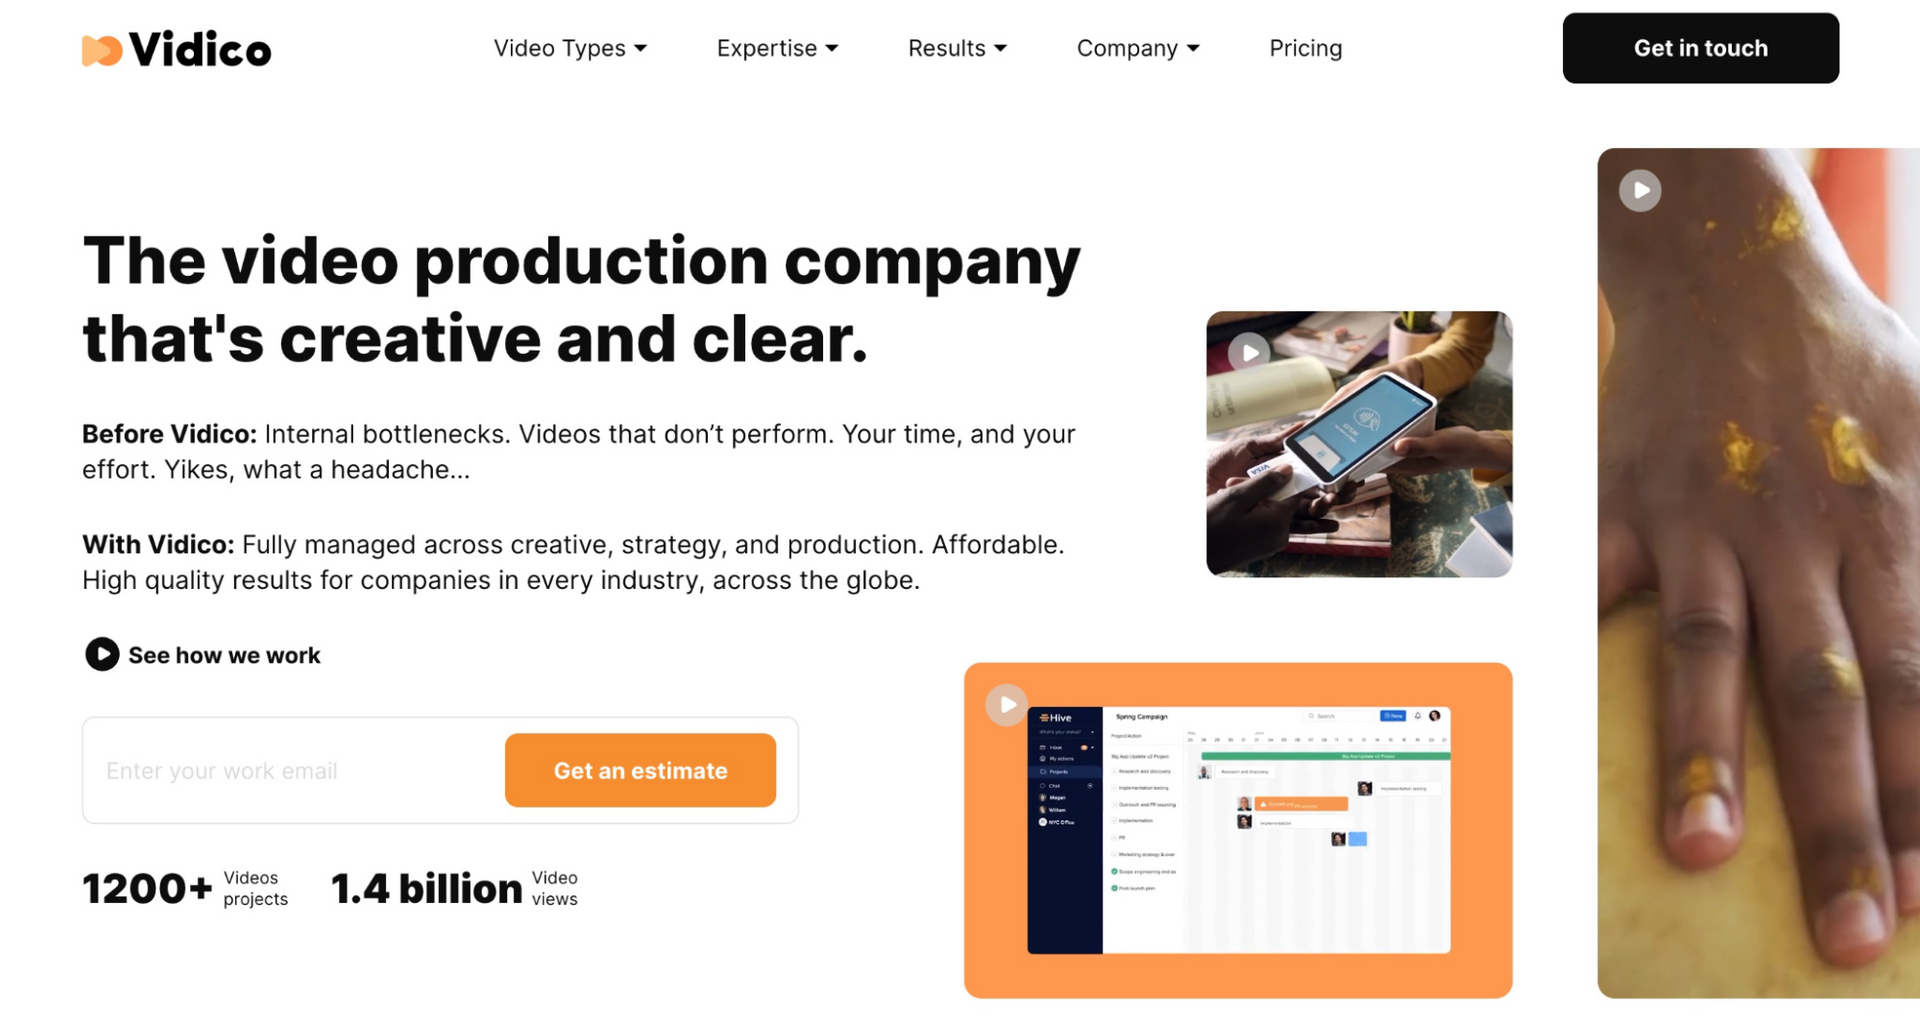 Vidico: The video production company that's creative and clear.